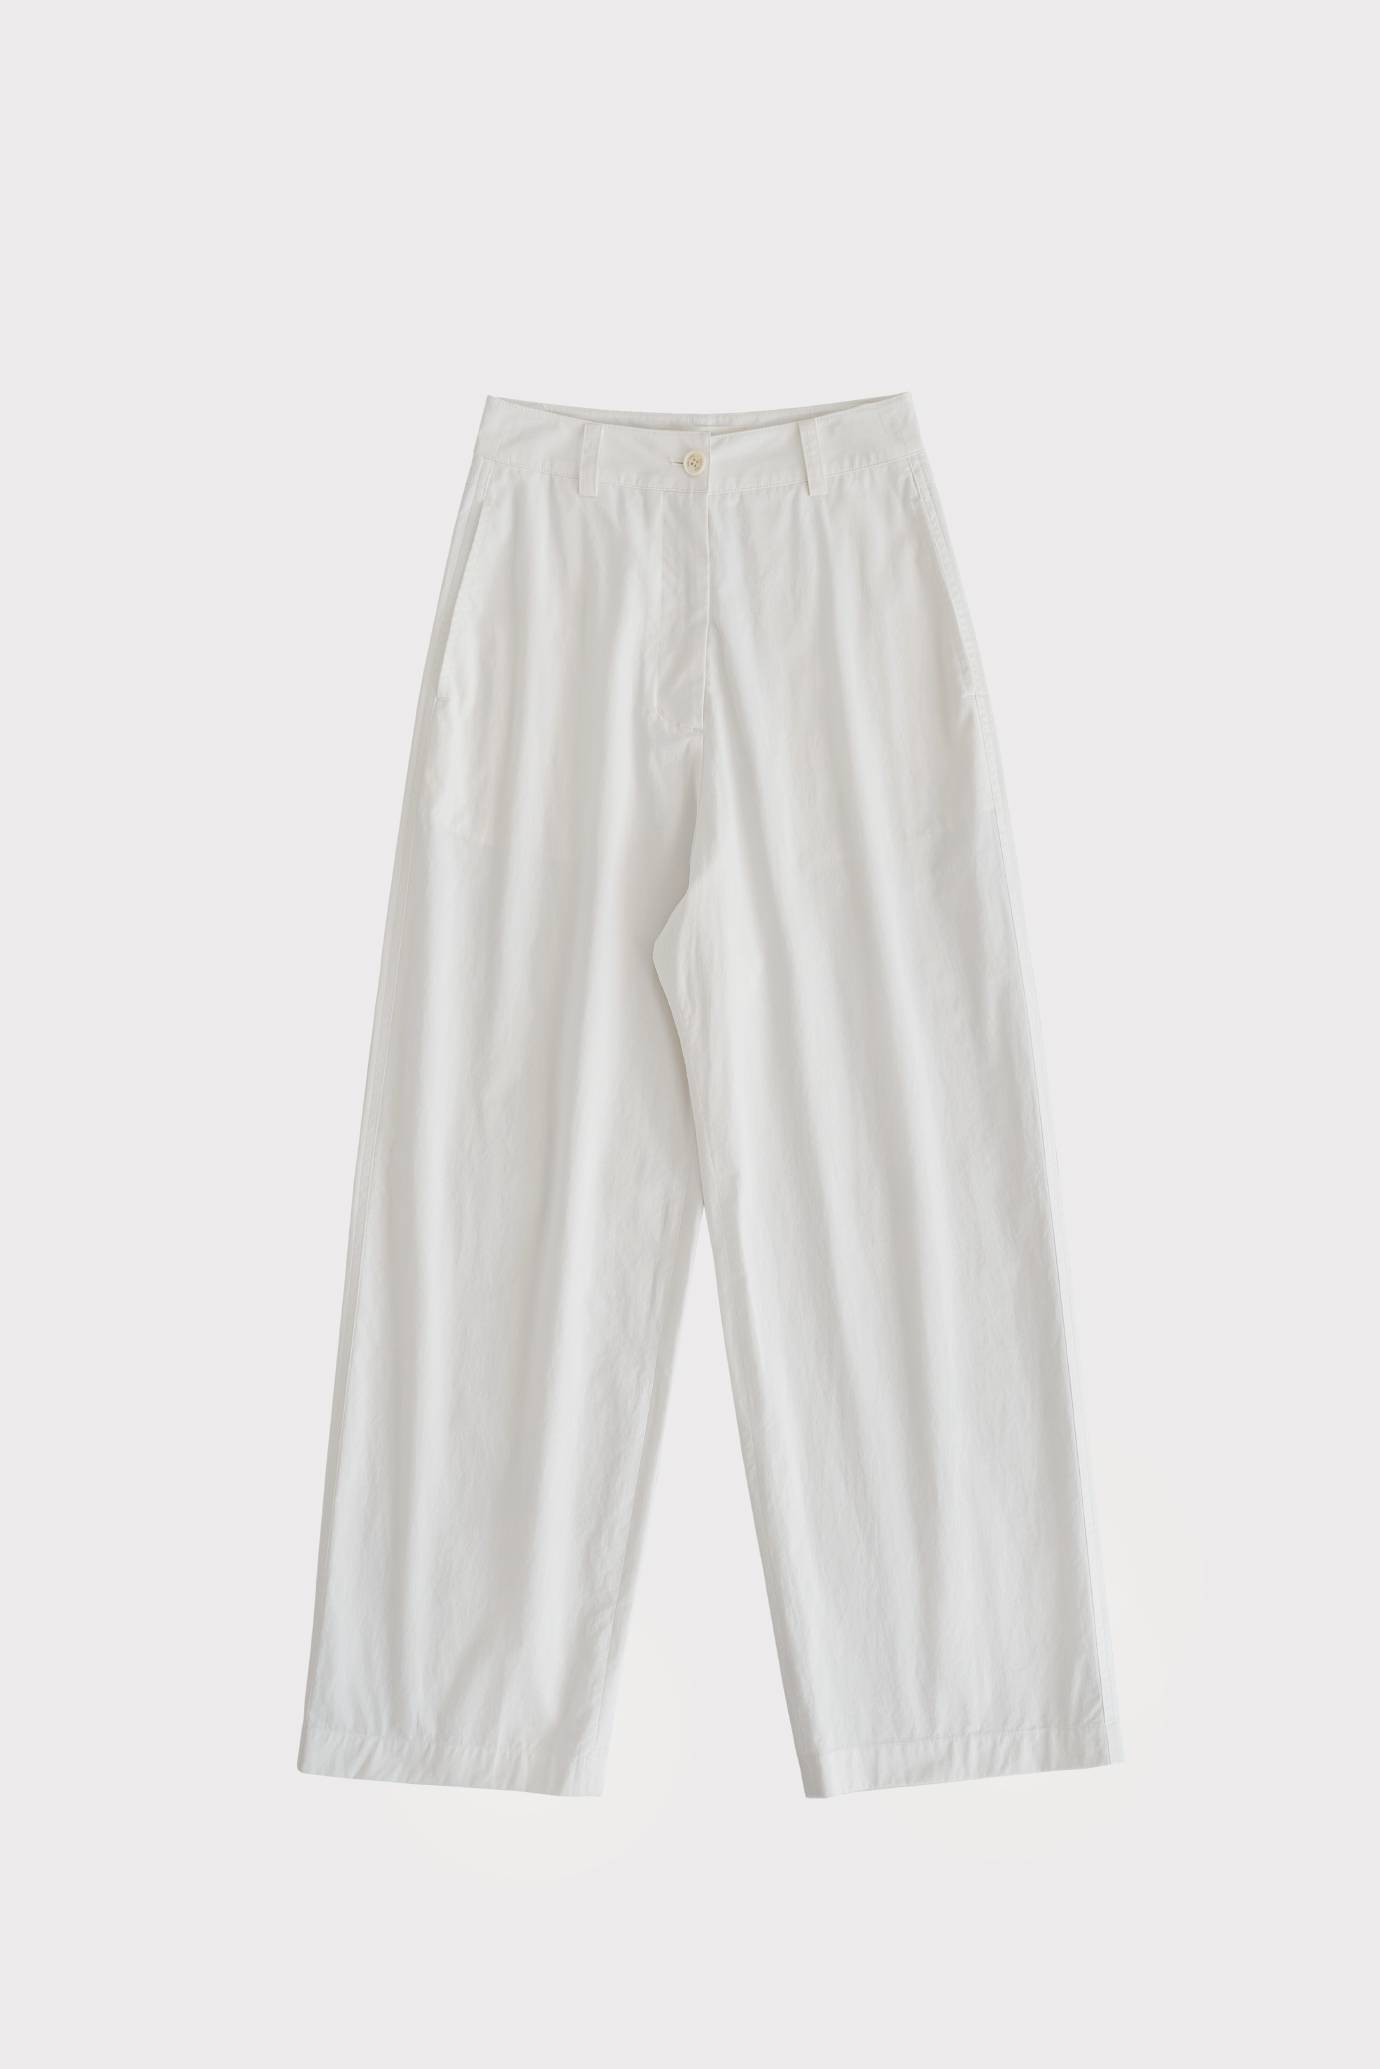 15602_Ivory Cotton Trousers